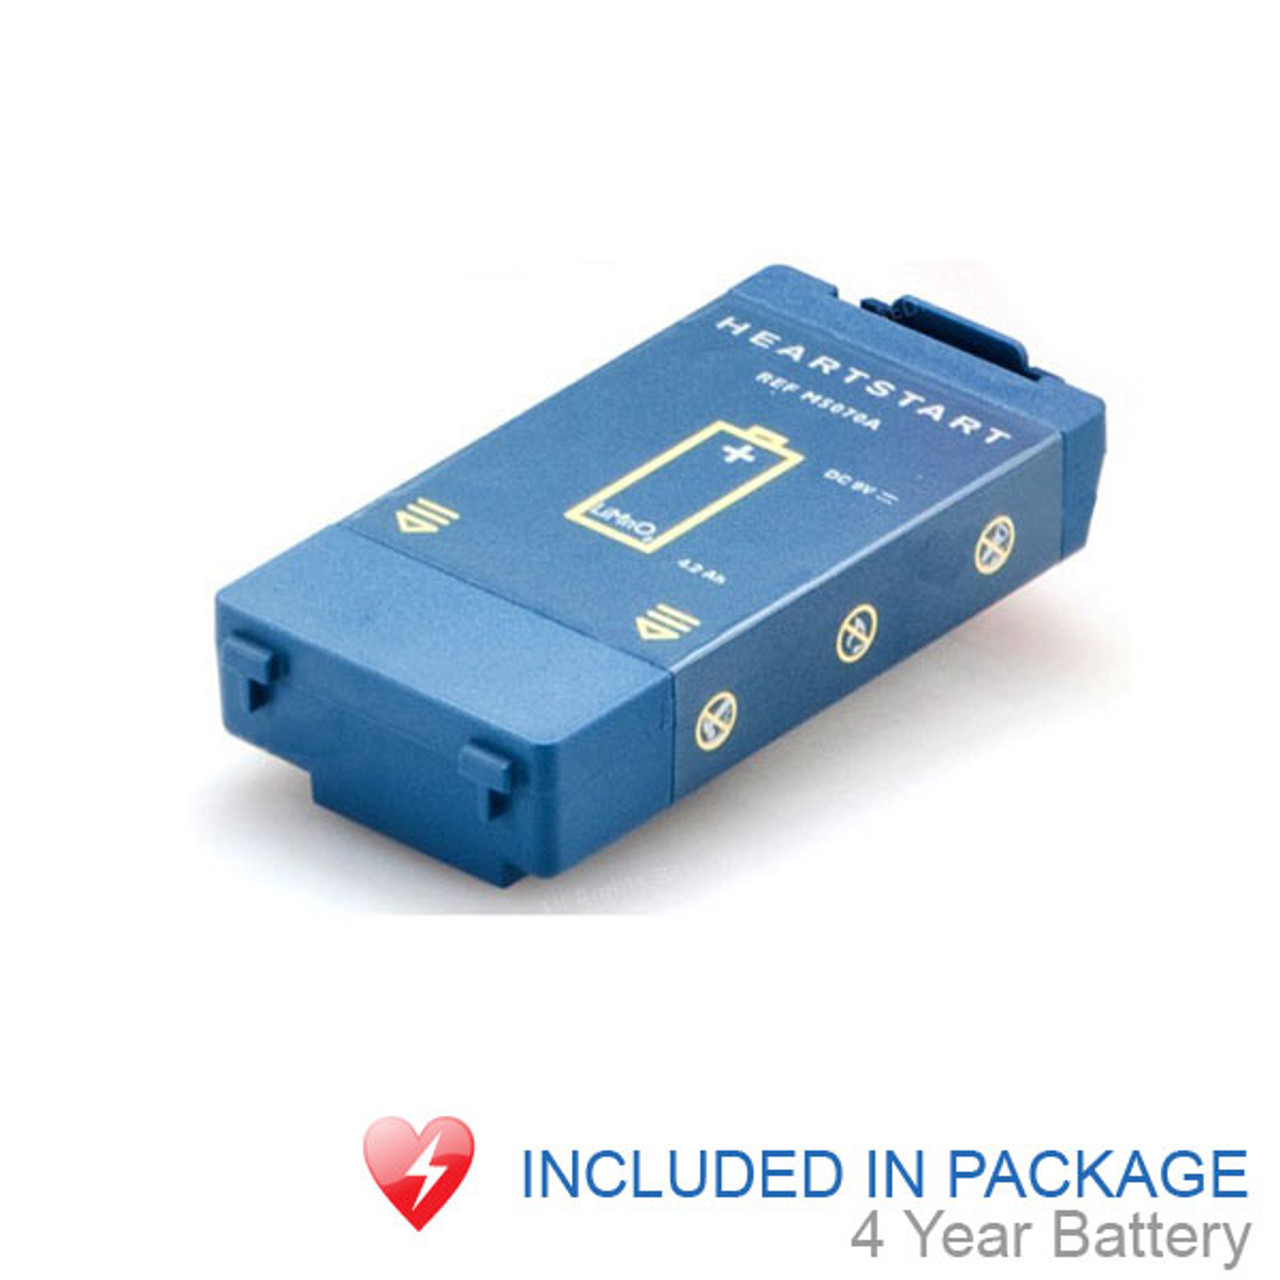 Philips HeartStart OnSite AED Deployment Package - CALL FOR SPRING PRICING SPECIALS 1 800 260 6362